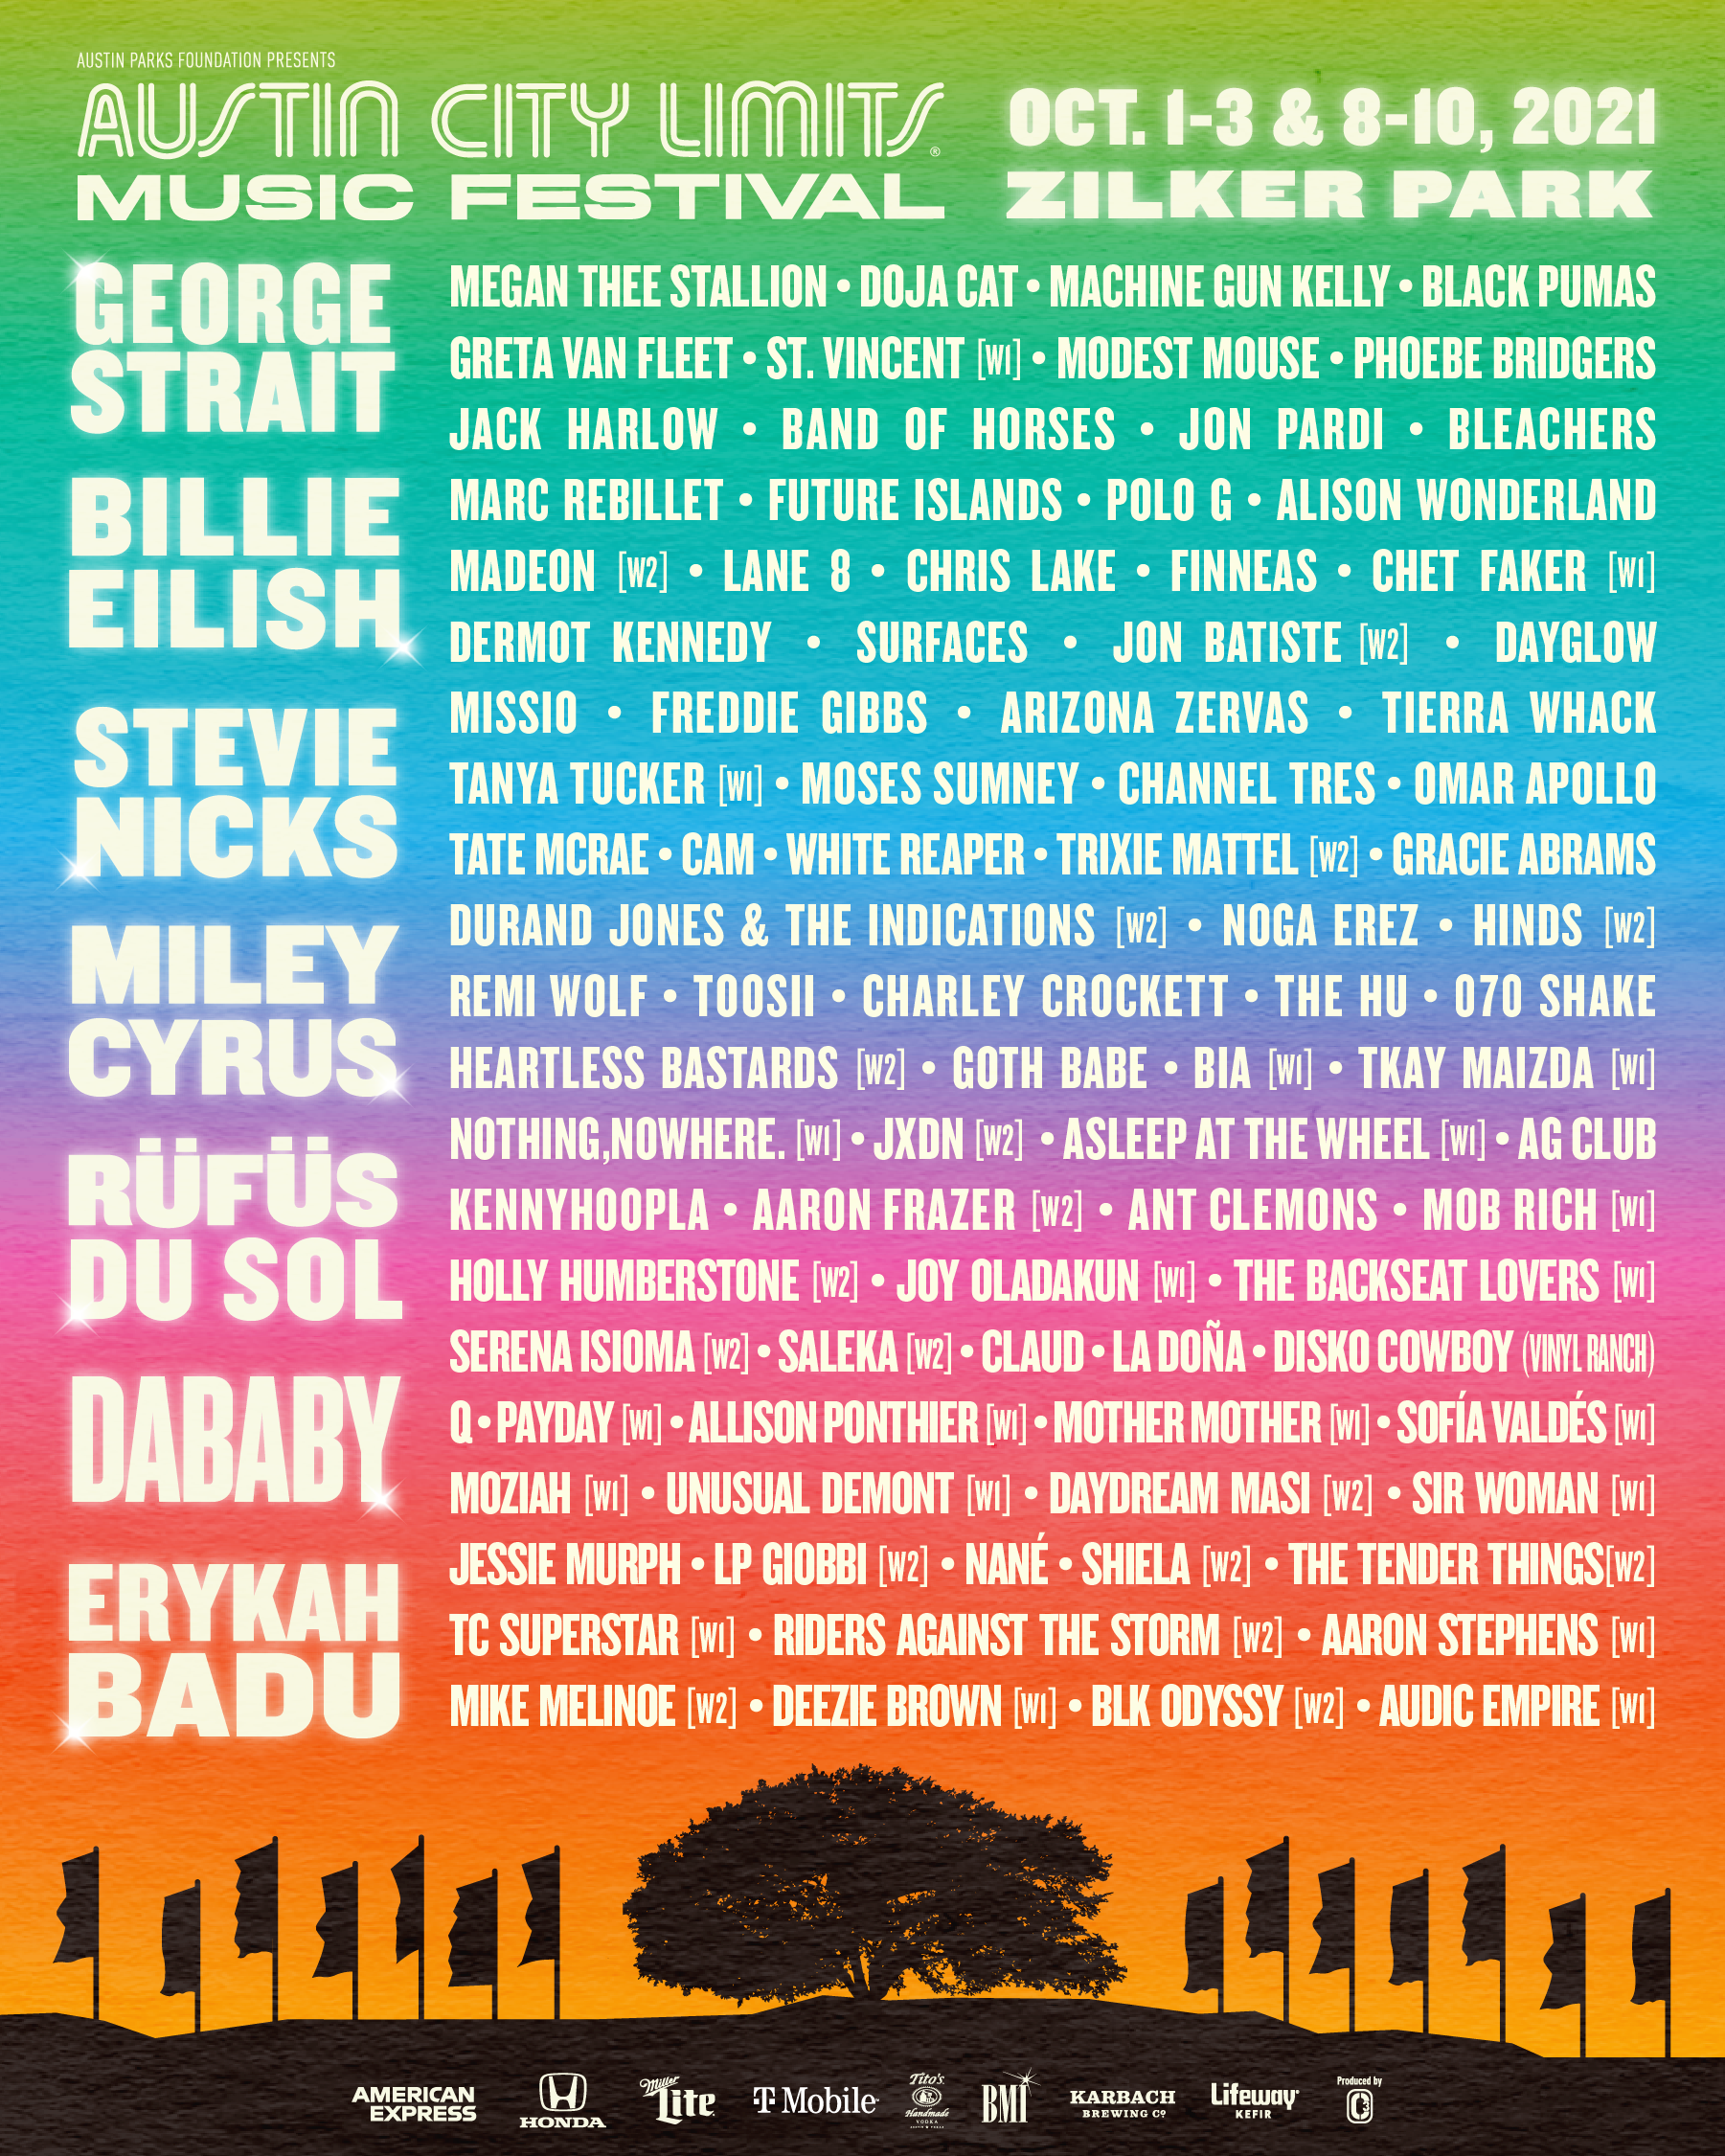 Austin City Limits Music Festival lineup. Image provided.